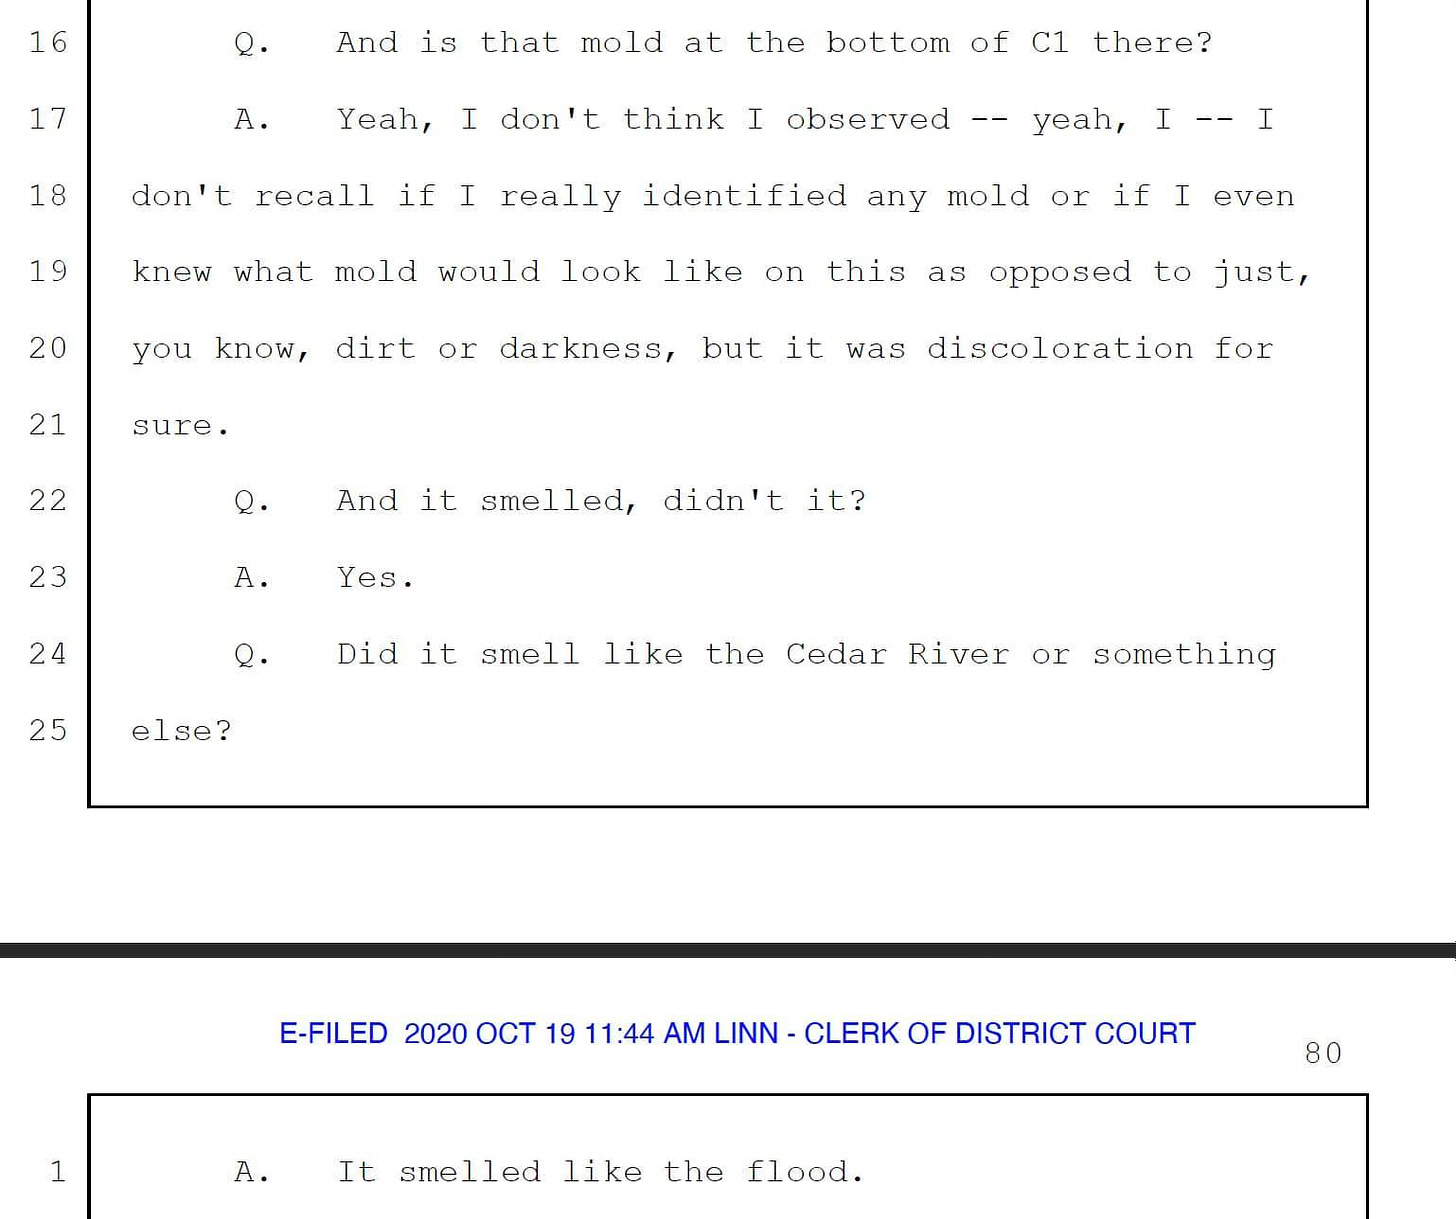 Transcript from court: “And is that mold at the bottom of C1 there?”  “Yeah, I don’t think I observed — yeah, I — I don’t recall if I really identified any mold or if I even knew what mold would look like on this as opposed to just, you know, dirt or darkness, but it was discoloration for sure.”  “And it smelled, didn’t it?”  “Yes.”  “Did it smell like the Cedar River or something else?”  “It smelled like the flood.”